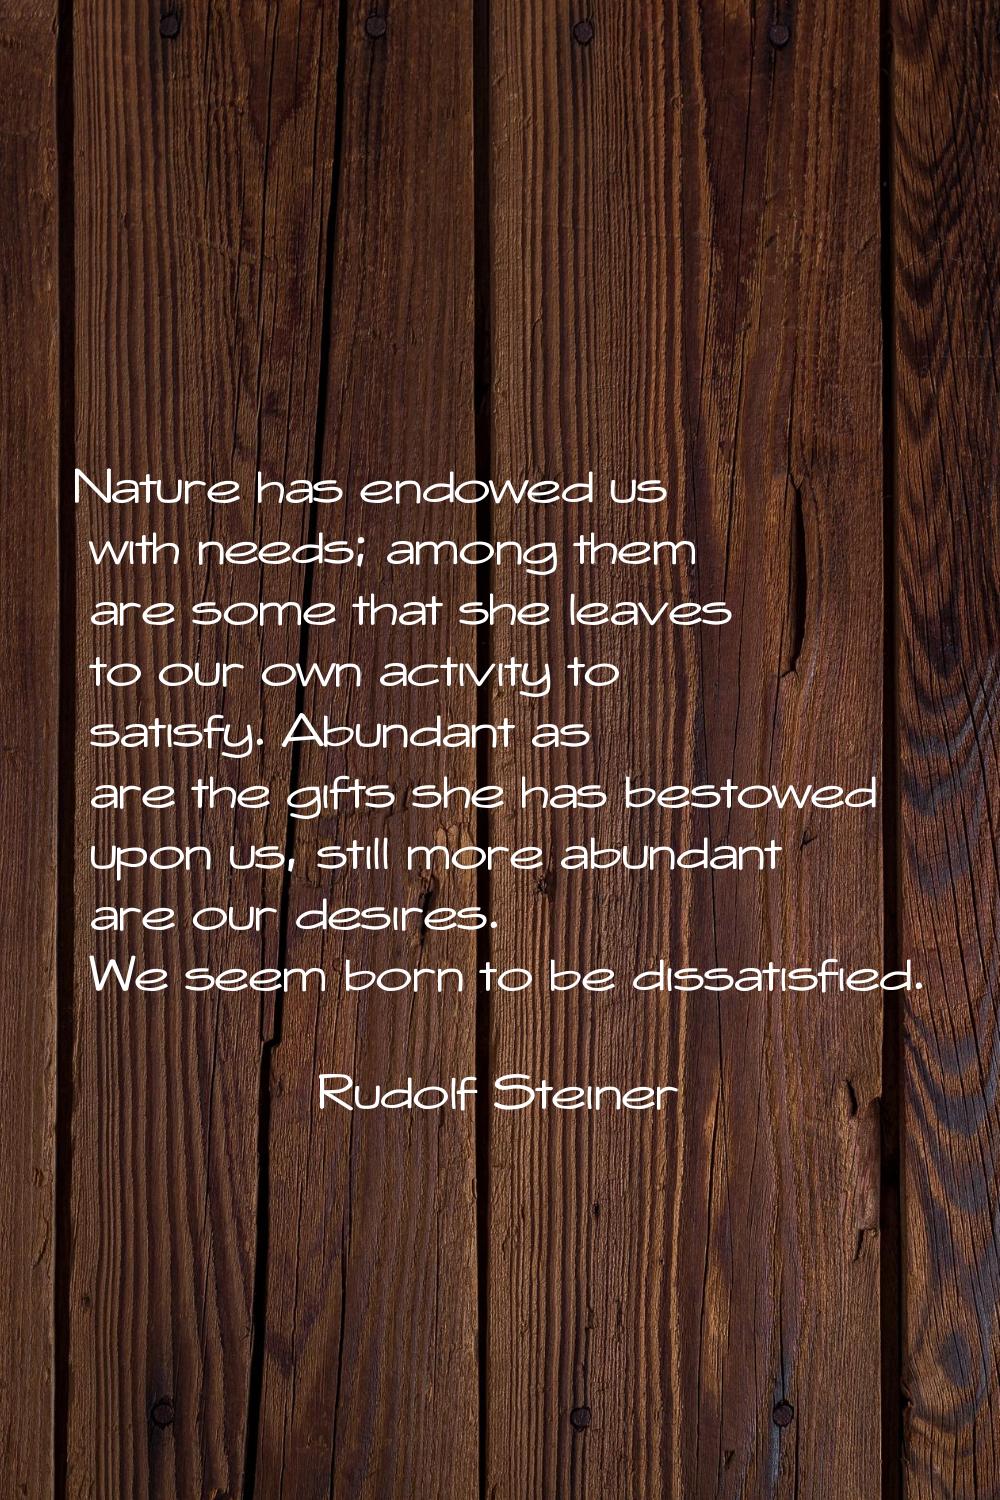 Nature has endowed us with needs; among them are some that she leaves to our own activity to satisf